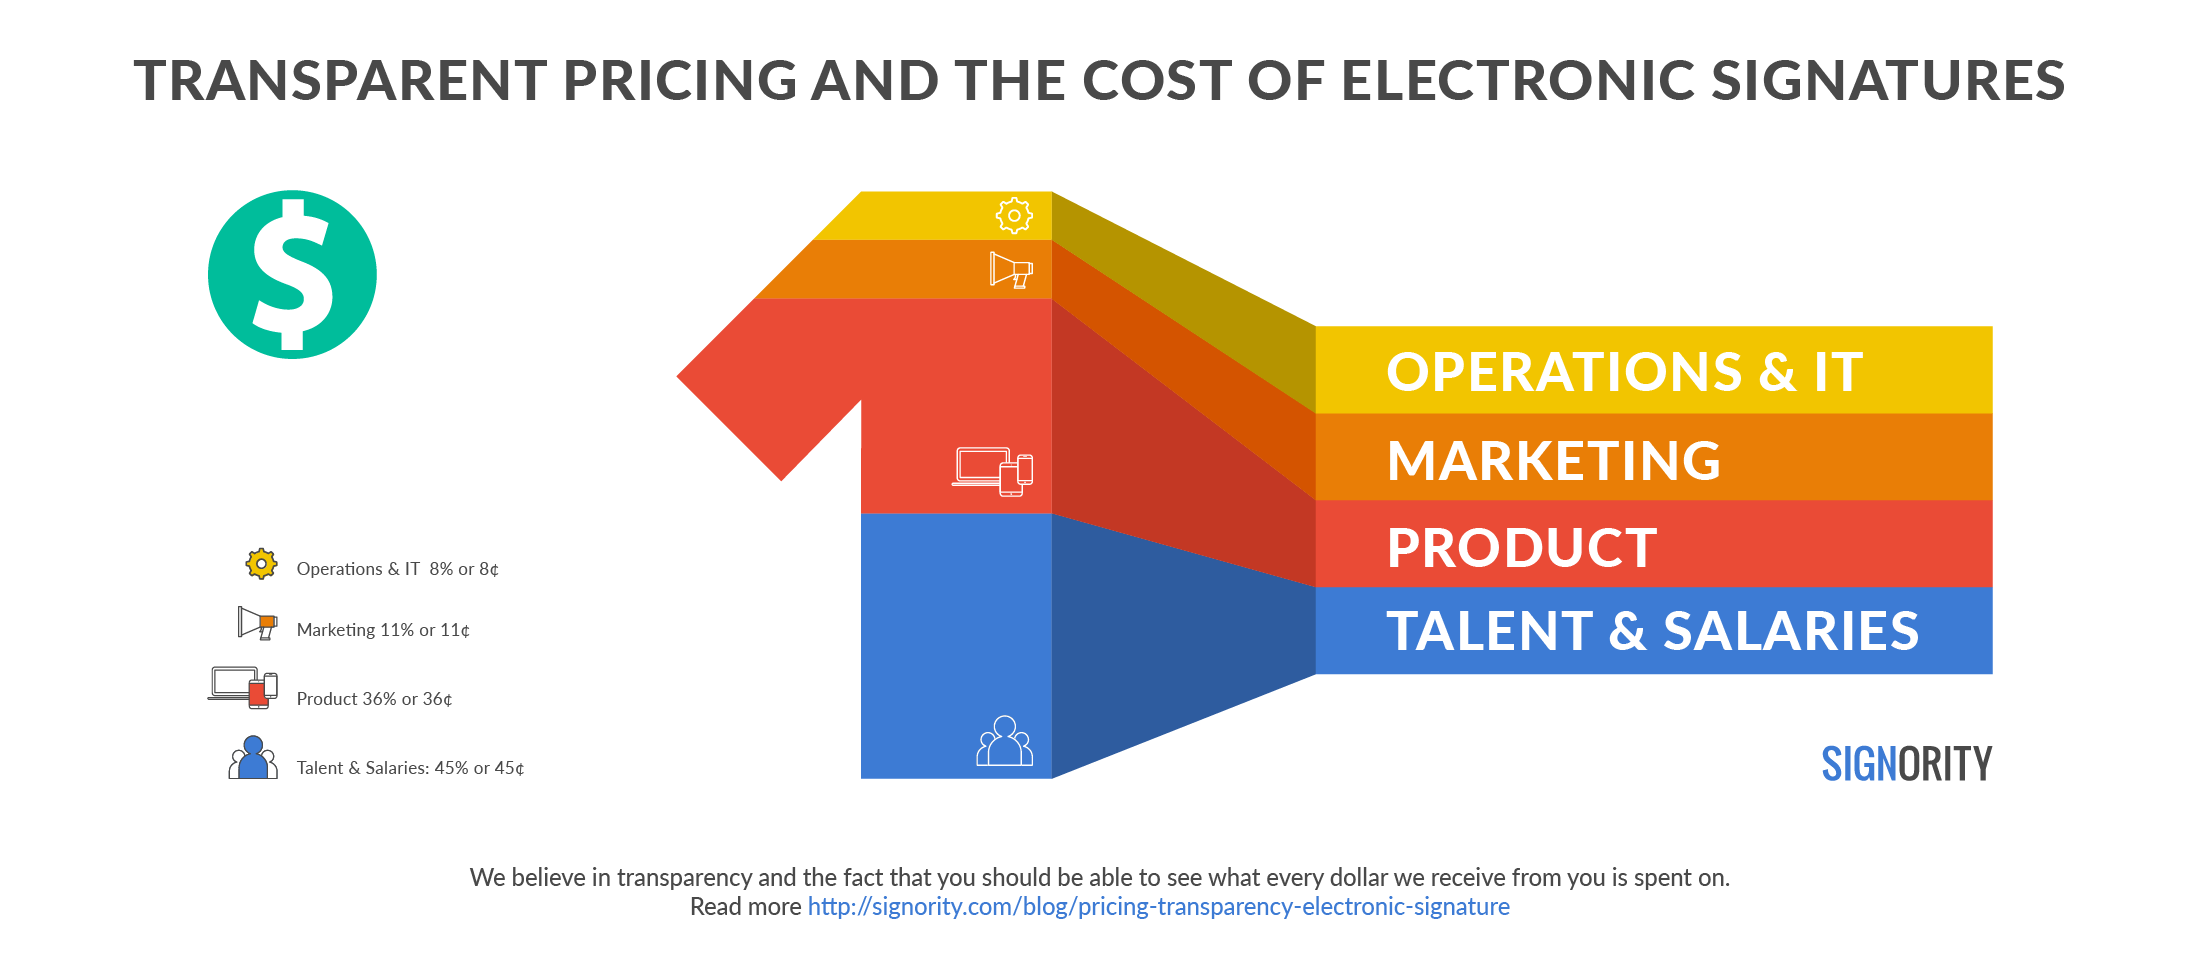 Pricing transparency and the cost of electronic signatures @ Signority